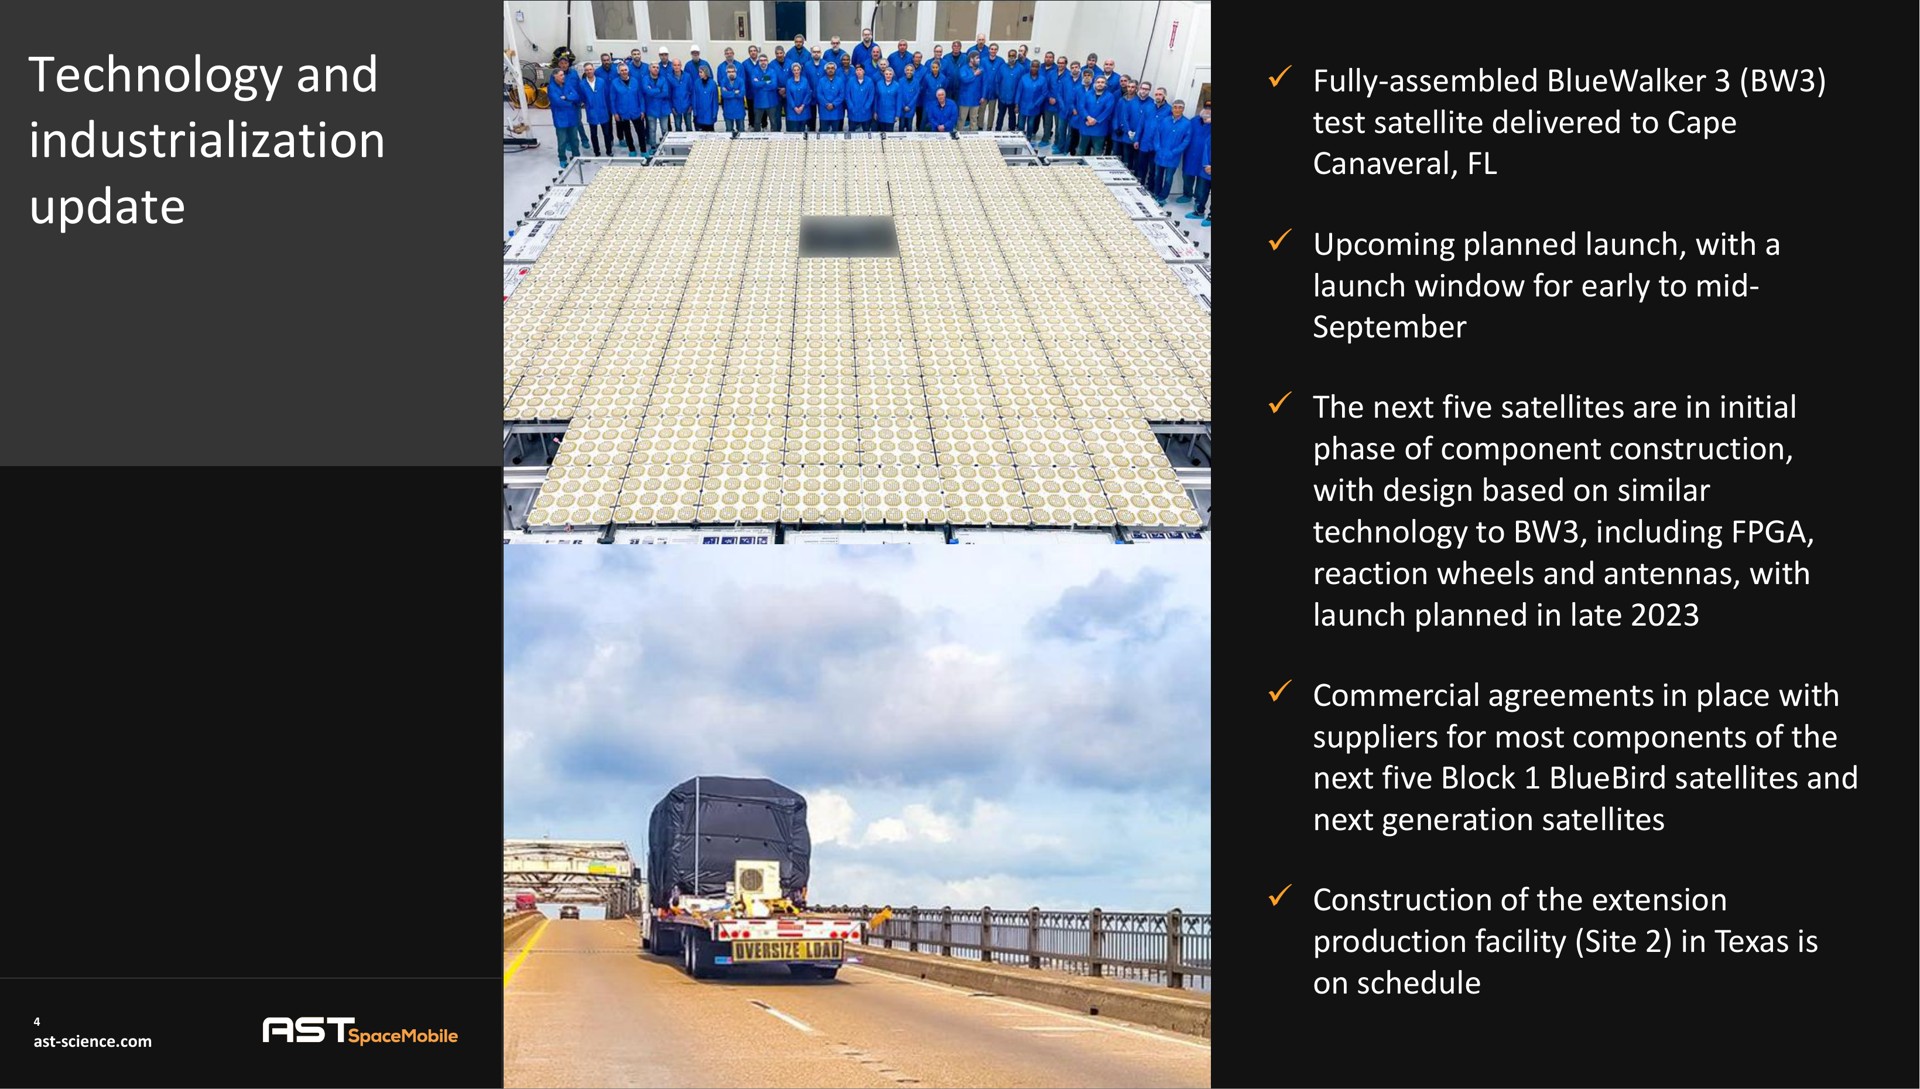 technology and industrialization update next five block bluebird satellites production facility site in is | AST SpaceMobile